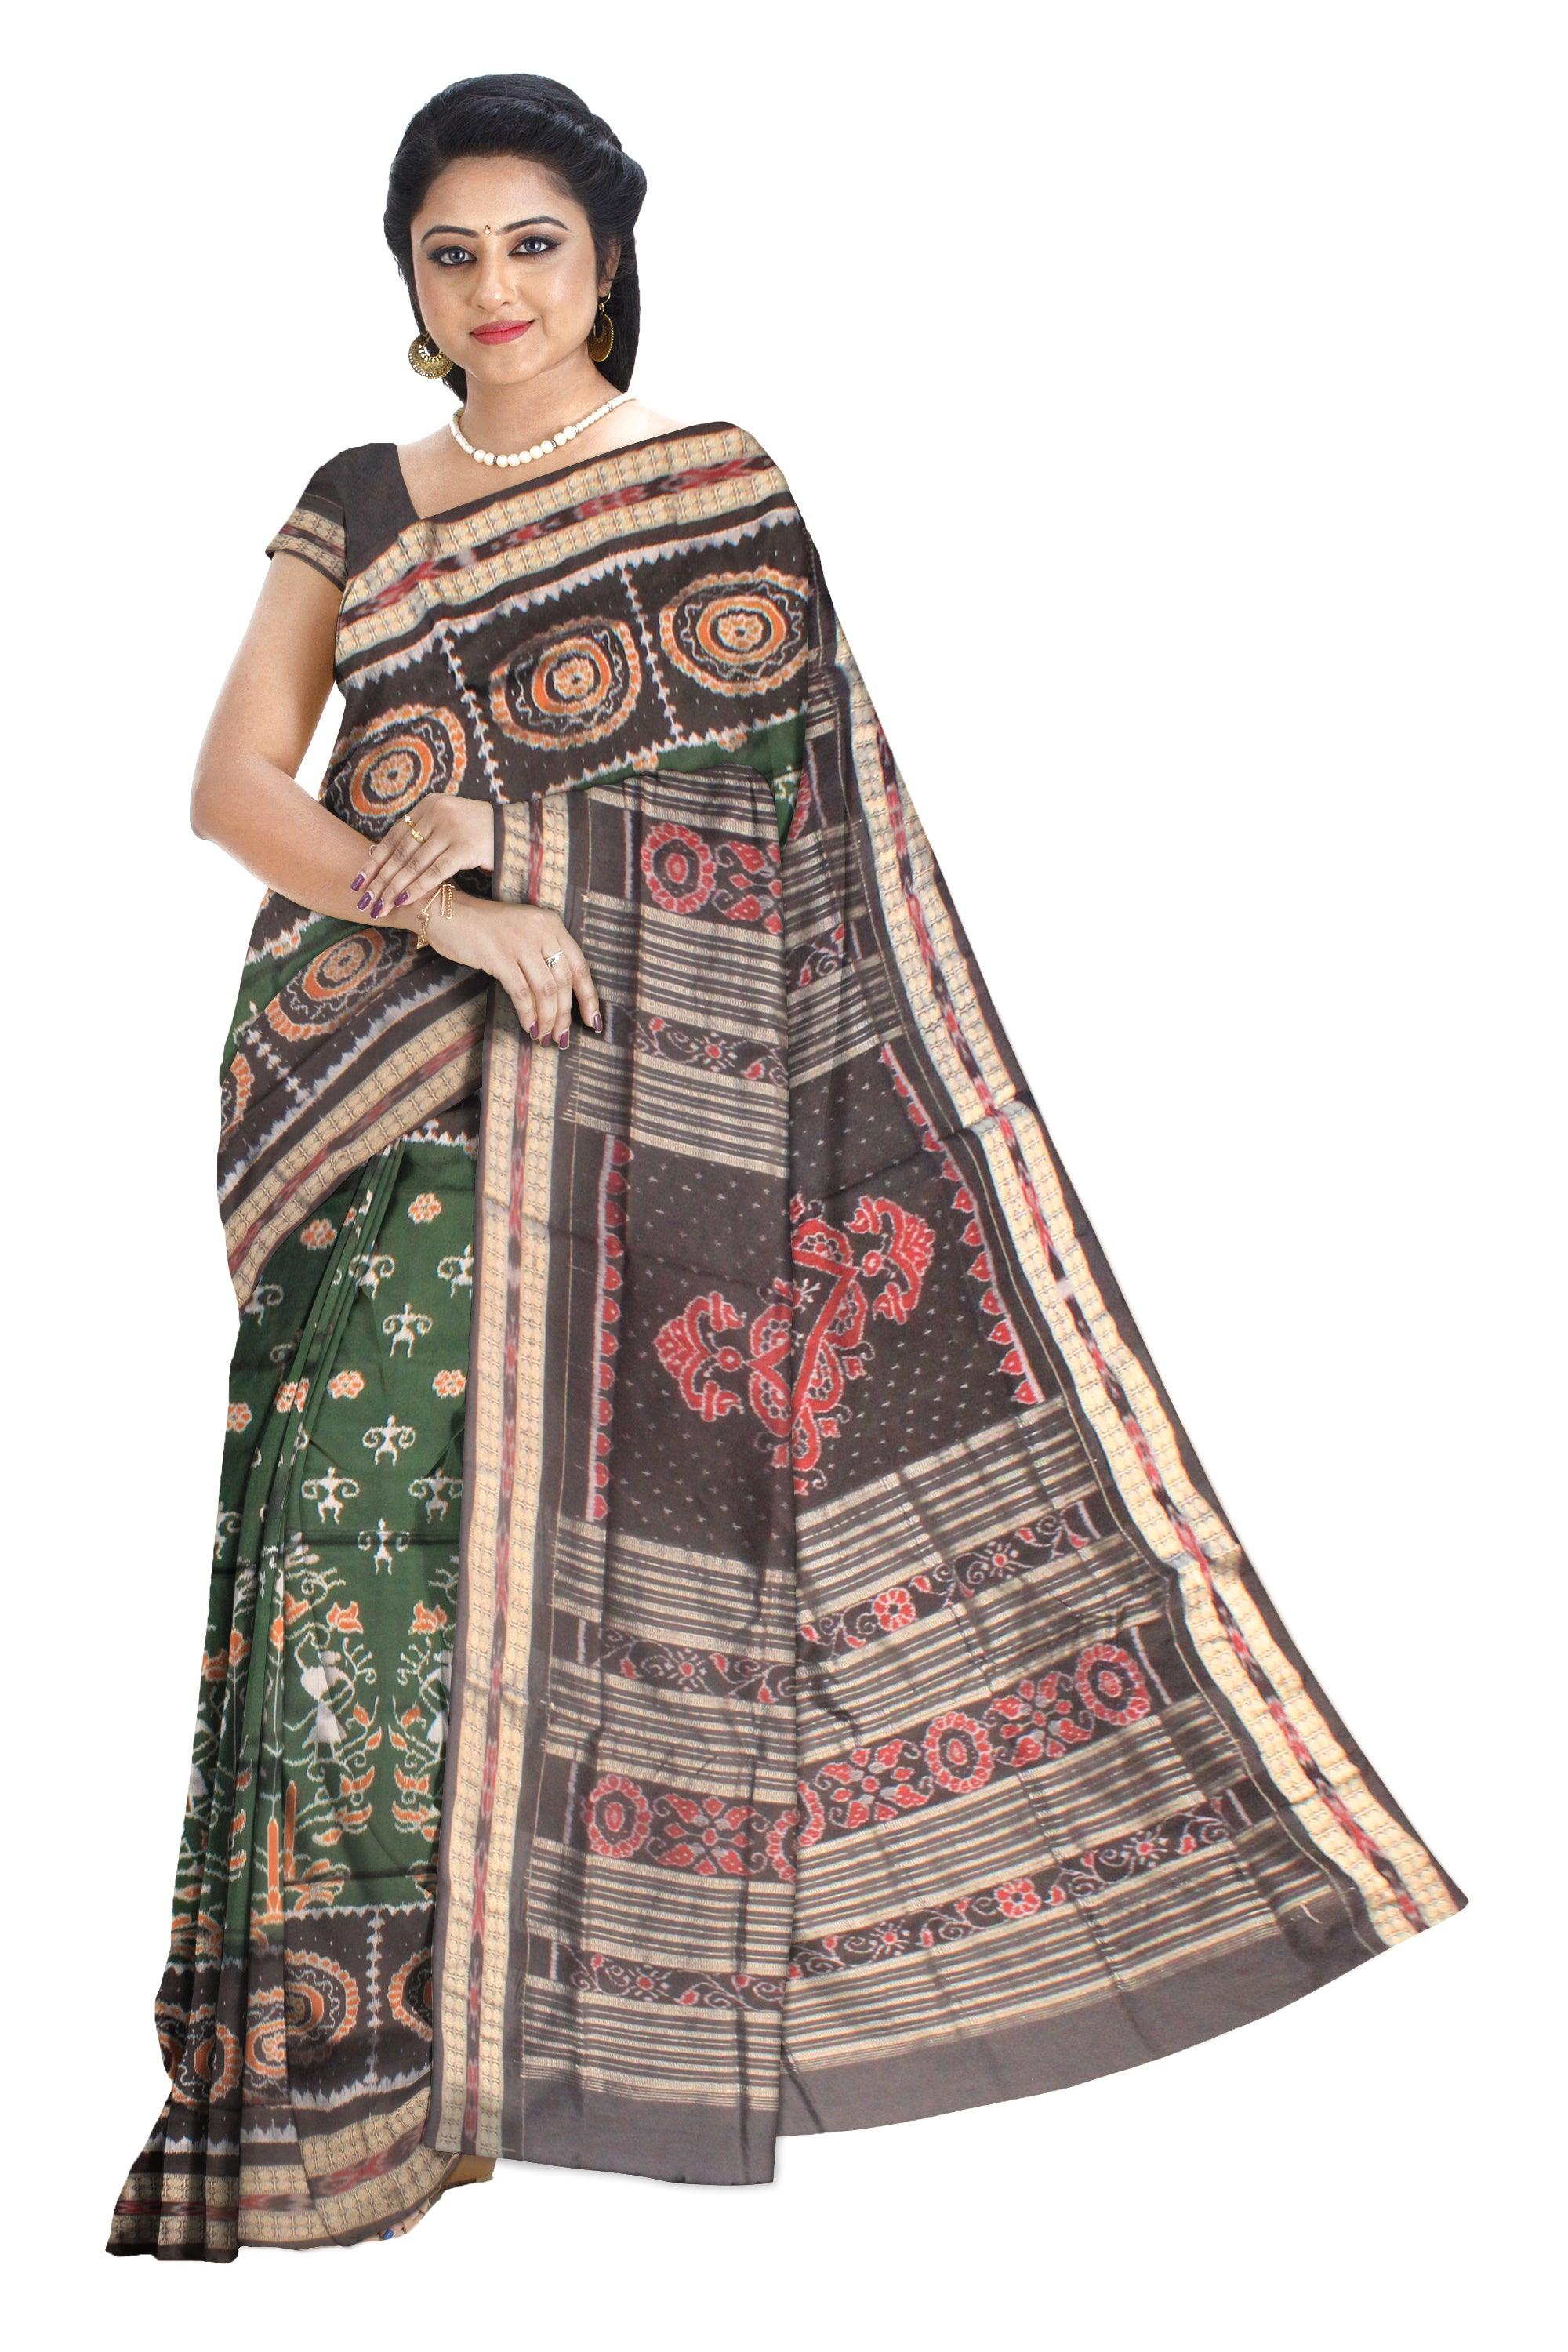 A SONEPUR PURE SILK PATA SAREE IN PERSIAN GREEN AND BLACK COLOR, WITH BLOUSE PIECE. - Koshali Arts & Crafts Enterprise